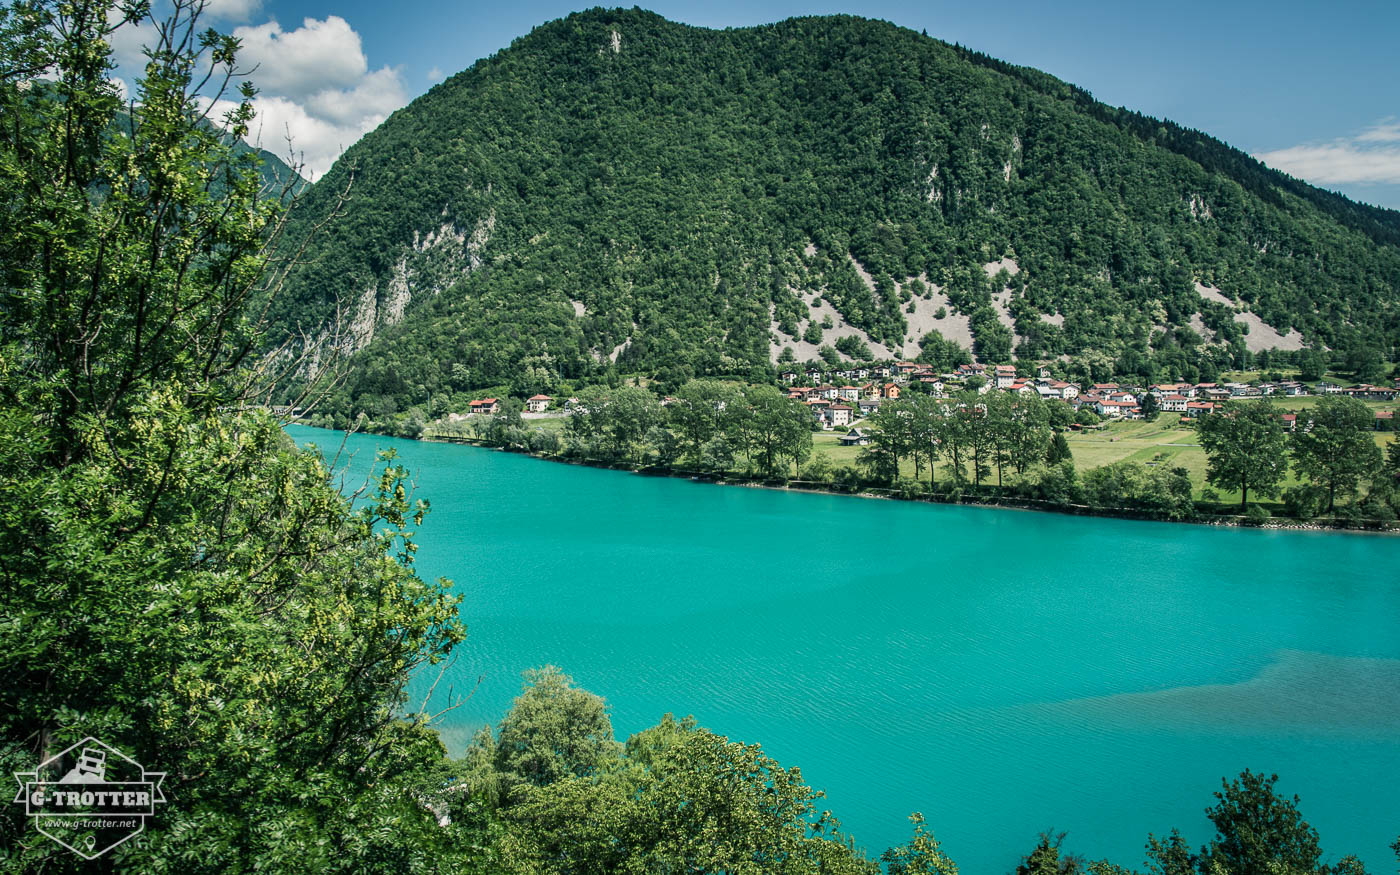 Unbelievable how turquoise the Soča river is.